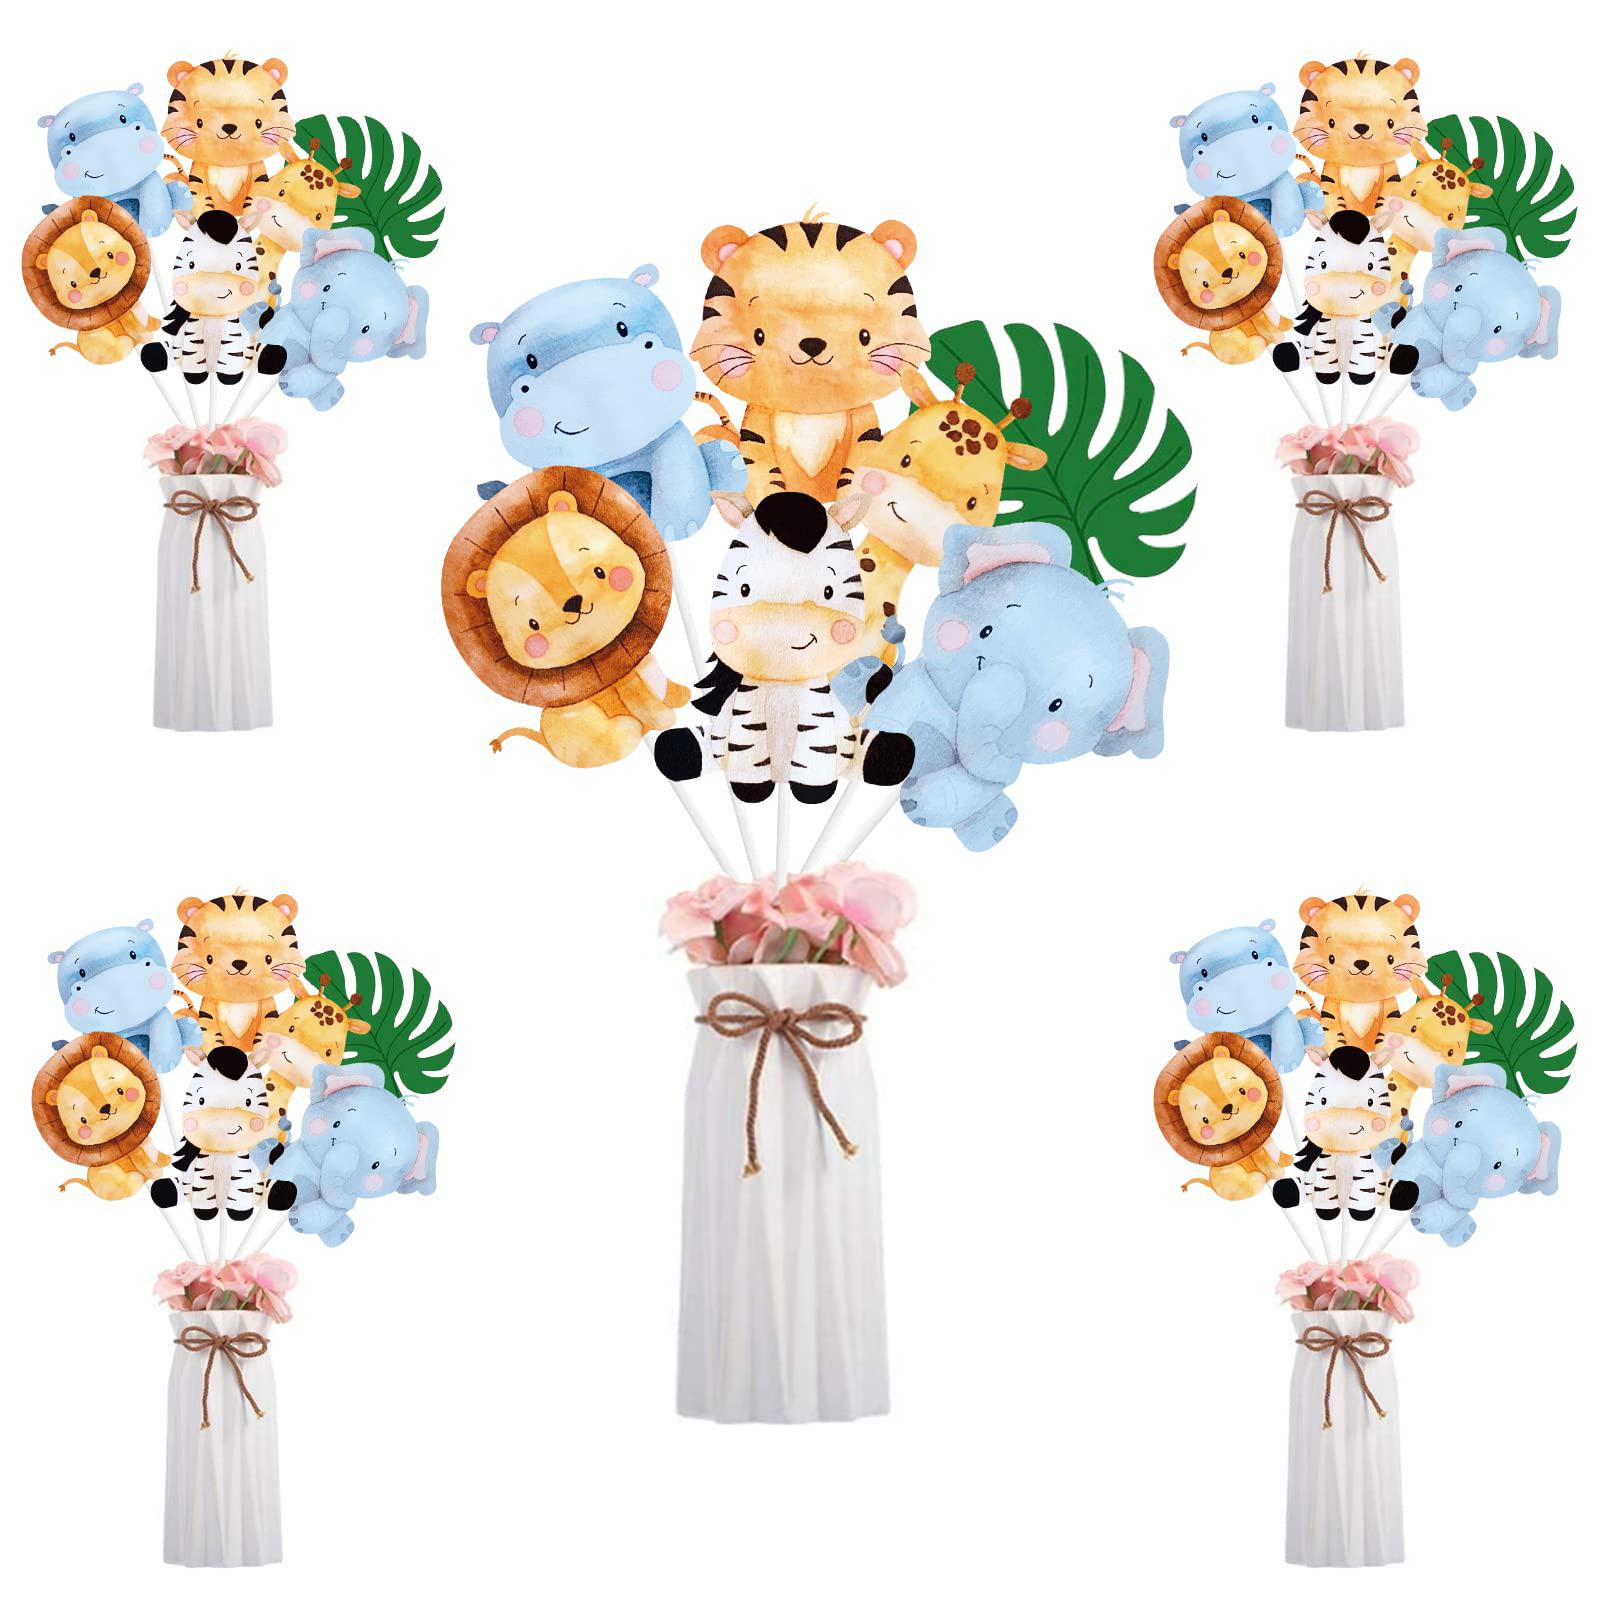 EDDJOND 28 pieces safarijungle animal sticks centerpieces topper for tabledecoration cute cutouts for kids baby shower or birthday zo